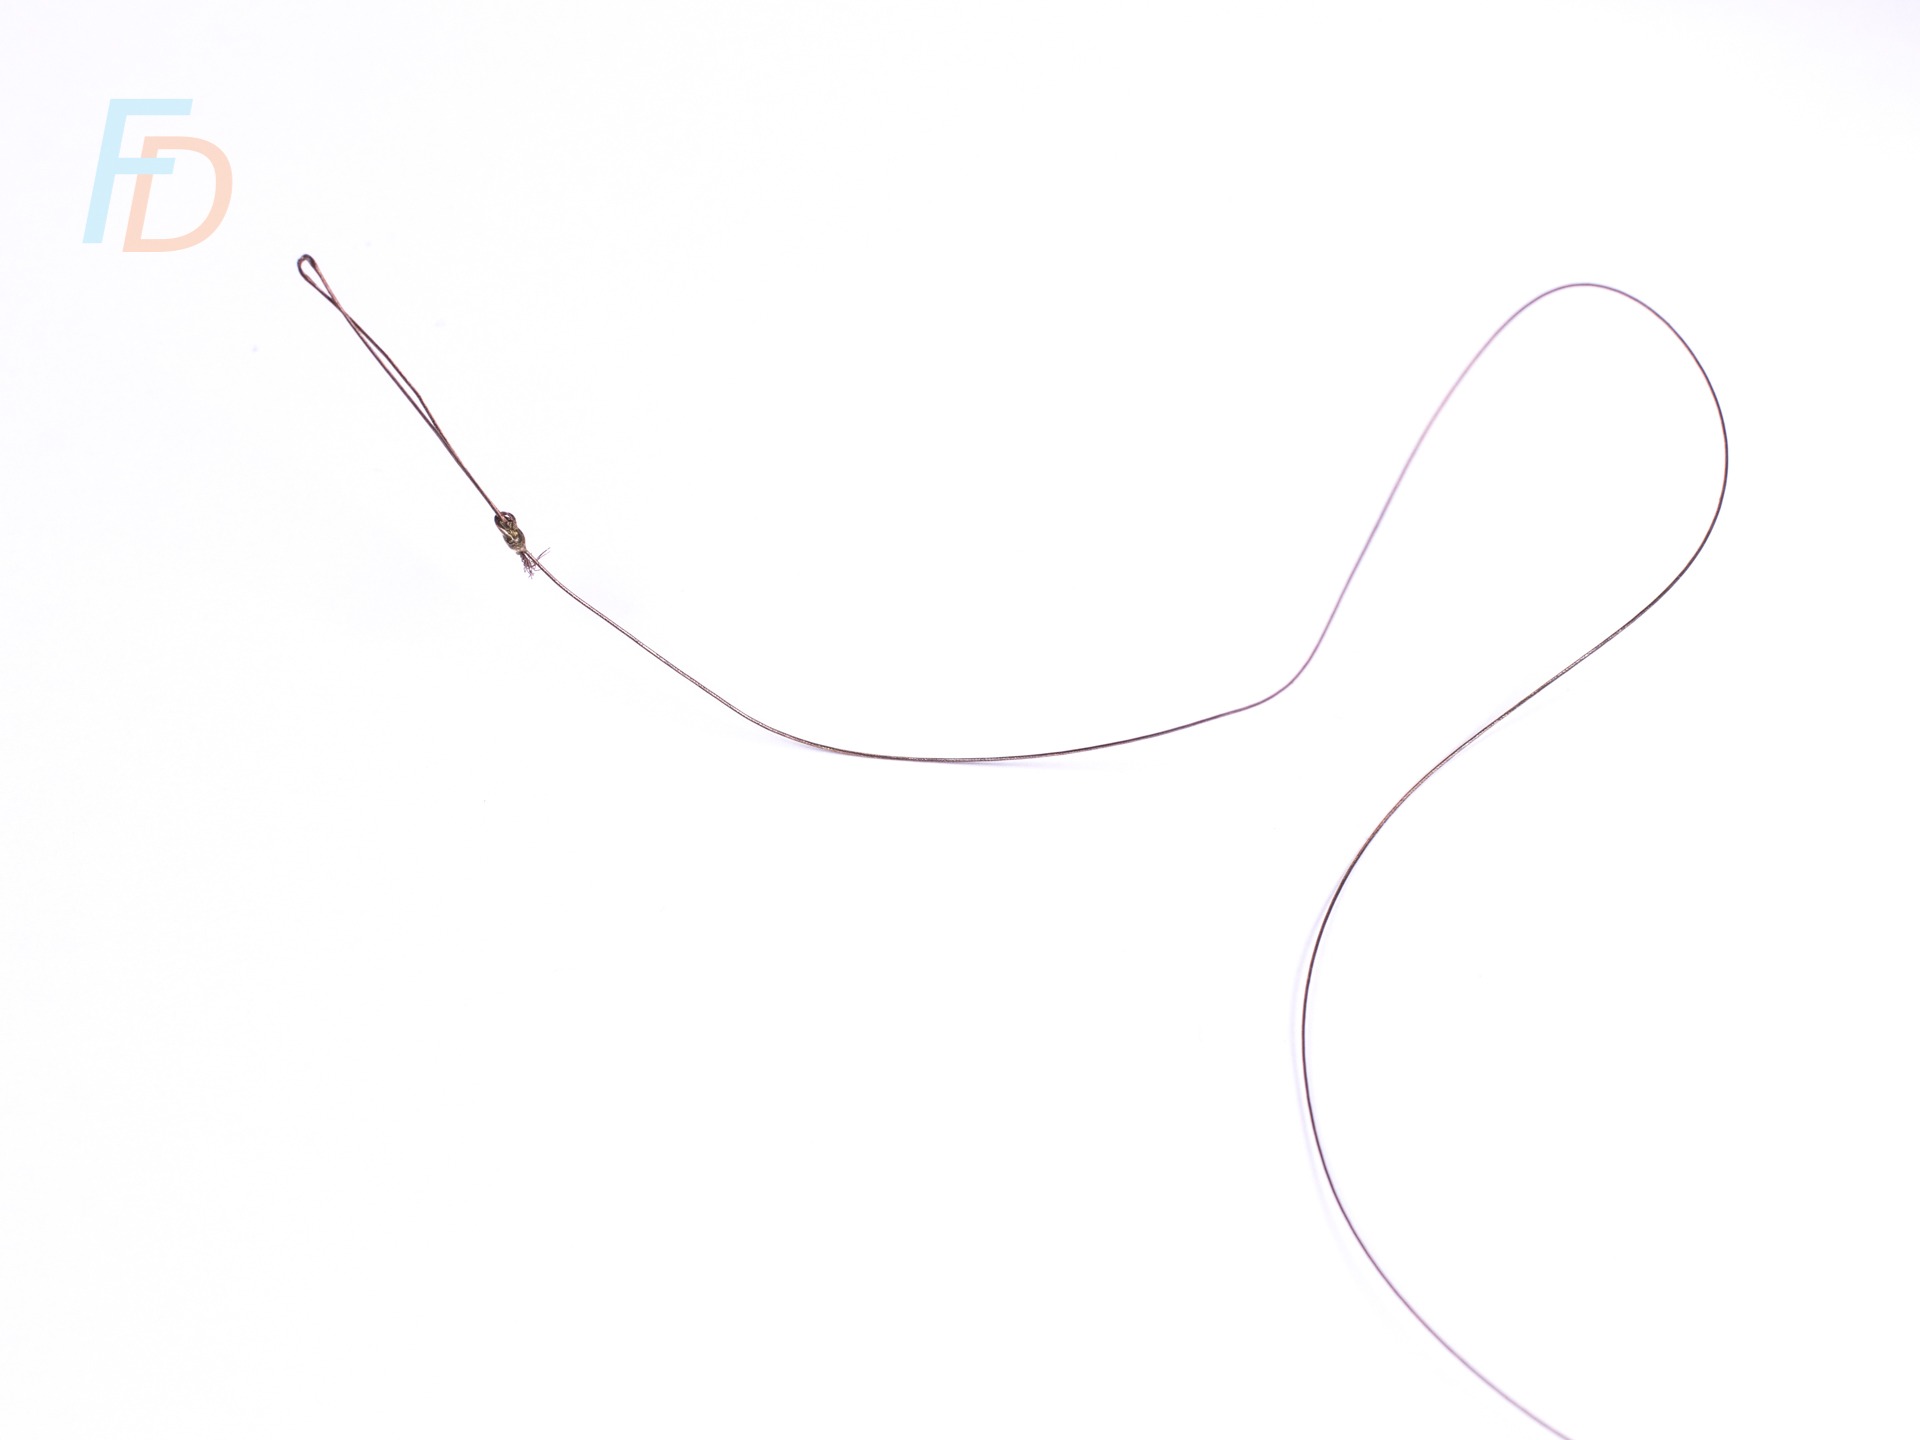 Knottable Wire Trace: Which Ultra Light Wire Trace Material is Best?